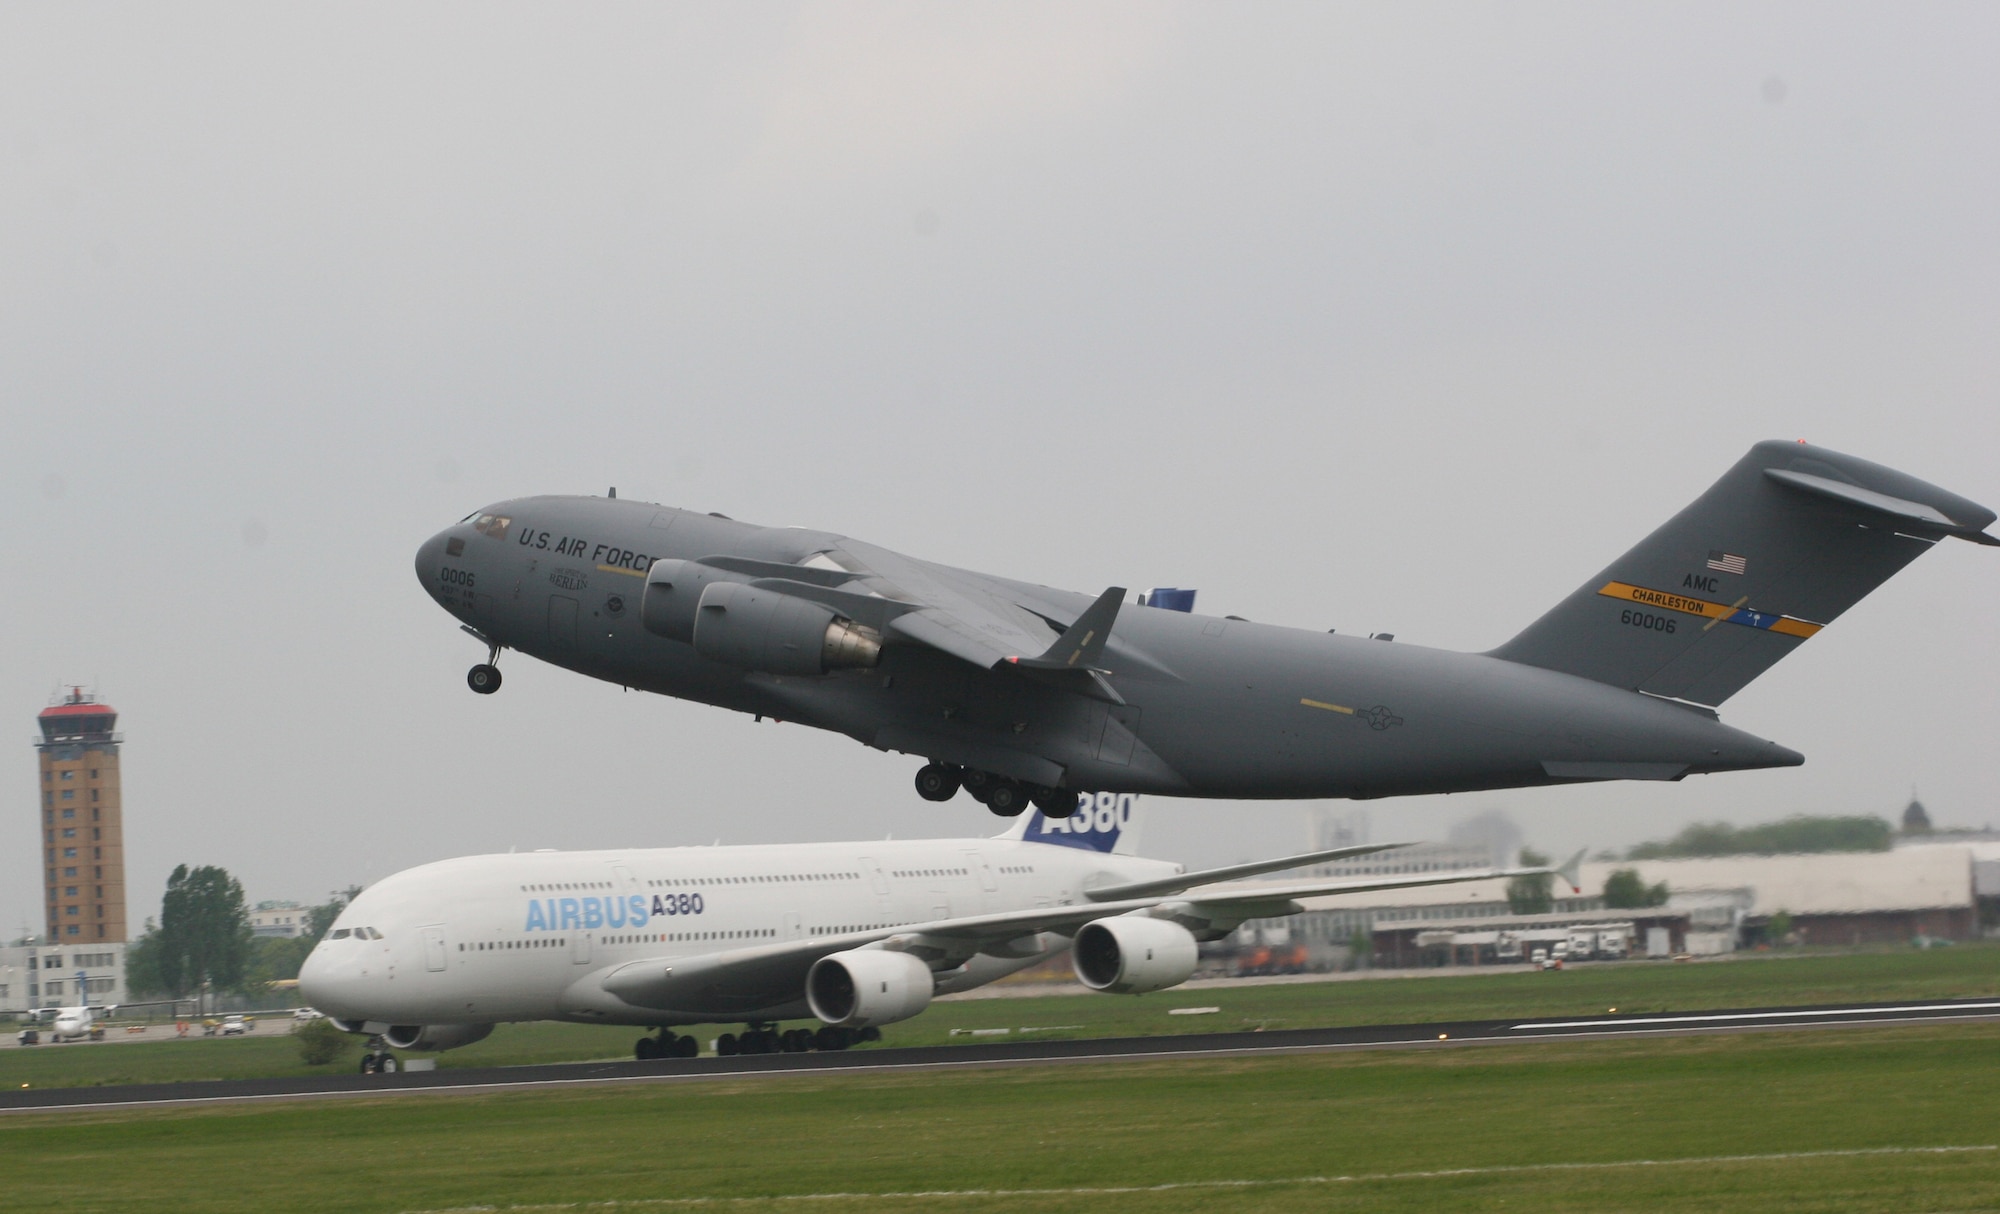 The "The Spirit of Berlin," a C-17 Globemaster III from Charleston Air Force Base, S.C., takes off for a flight demonstration at the Berlin Air Show on May 16, 2006.  The C-17 and other Air Force and Army aircraft are on display at the air show at Berlin-Schoenefeld Airport May 16-21.  (U.S. Air Force photo/Maj. Pamela A.Q. Cook)